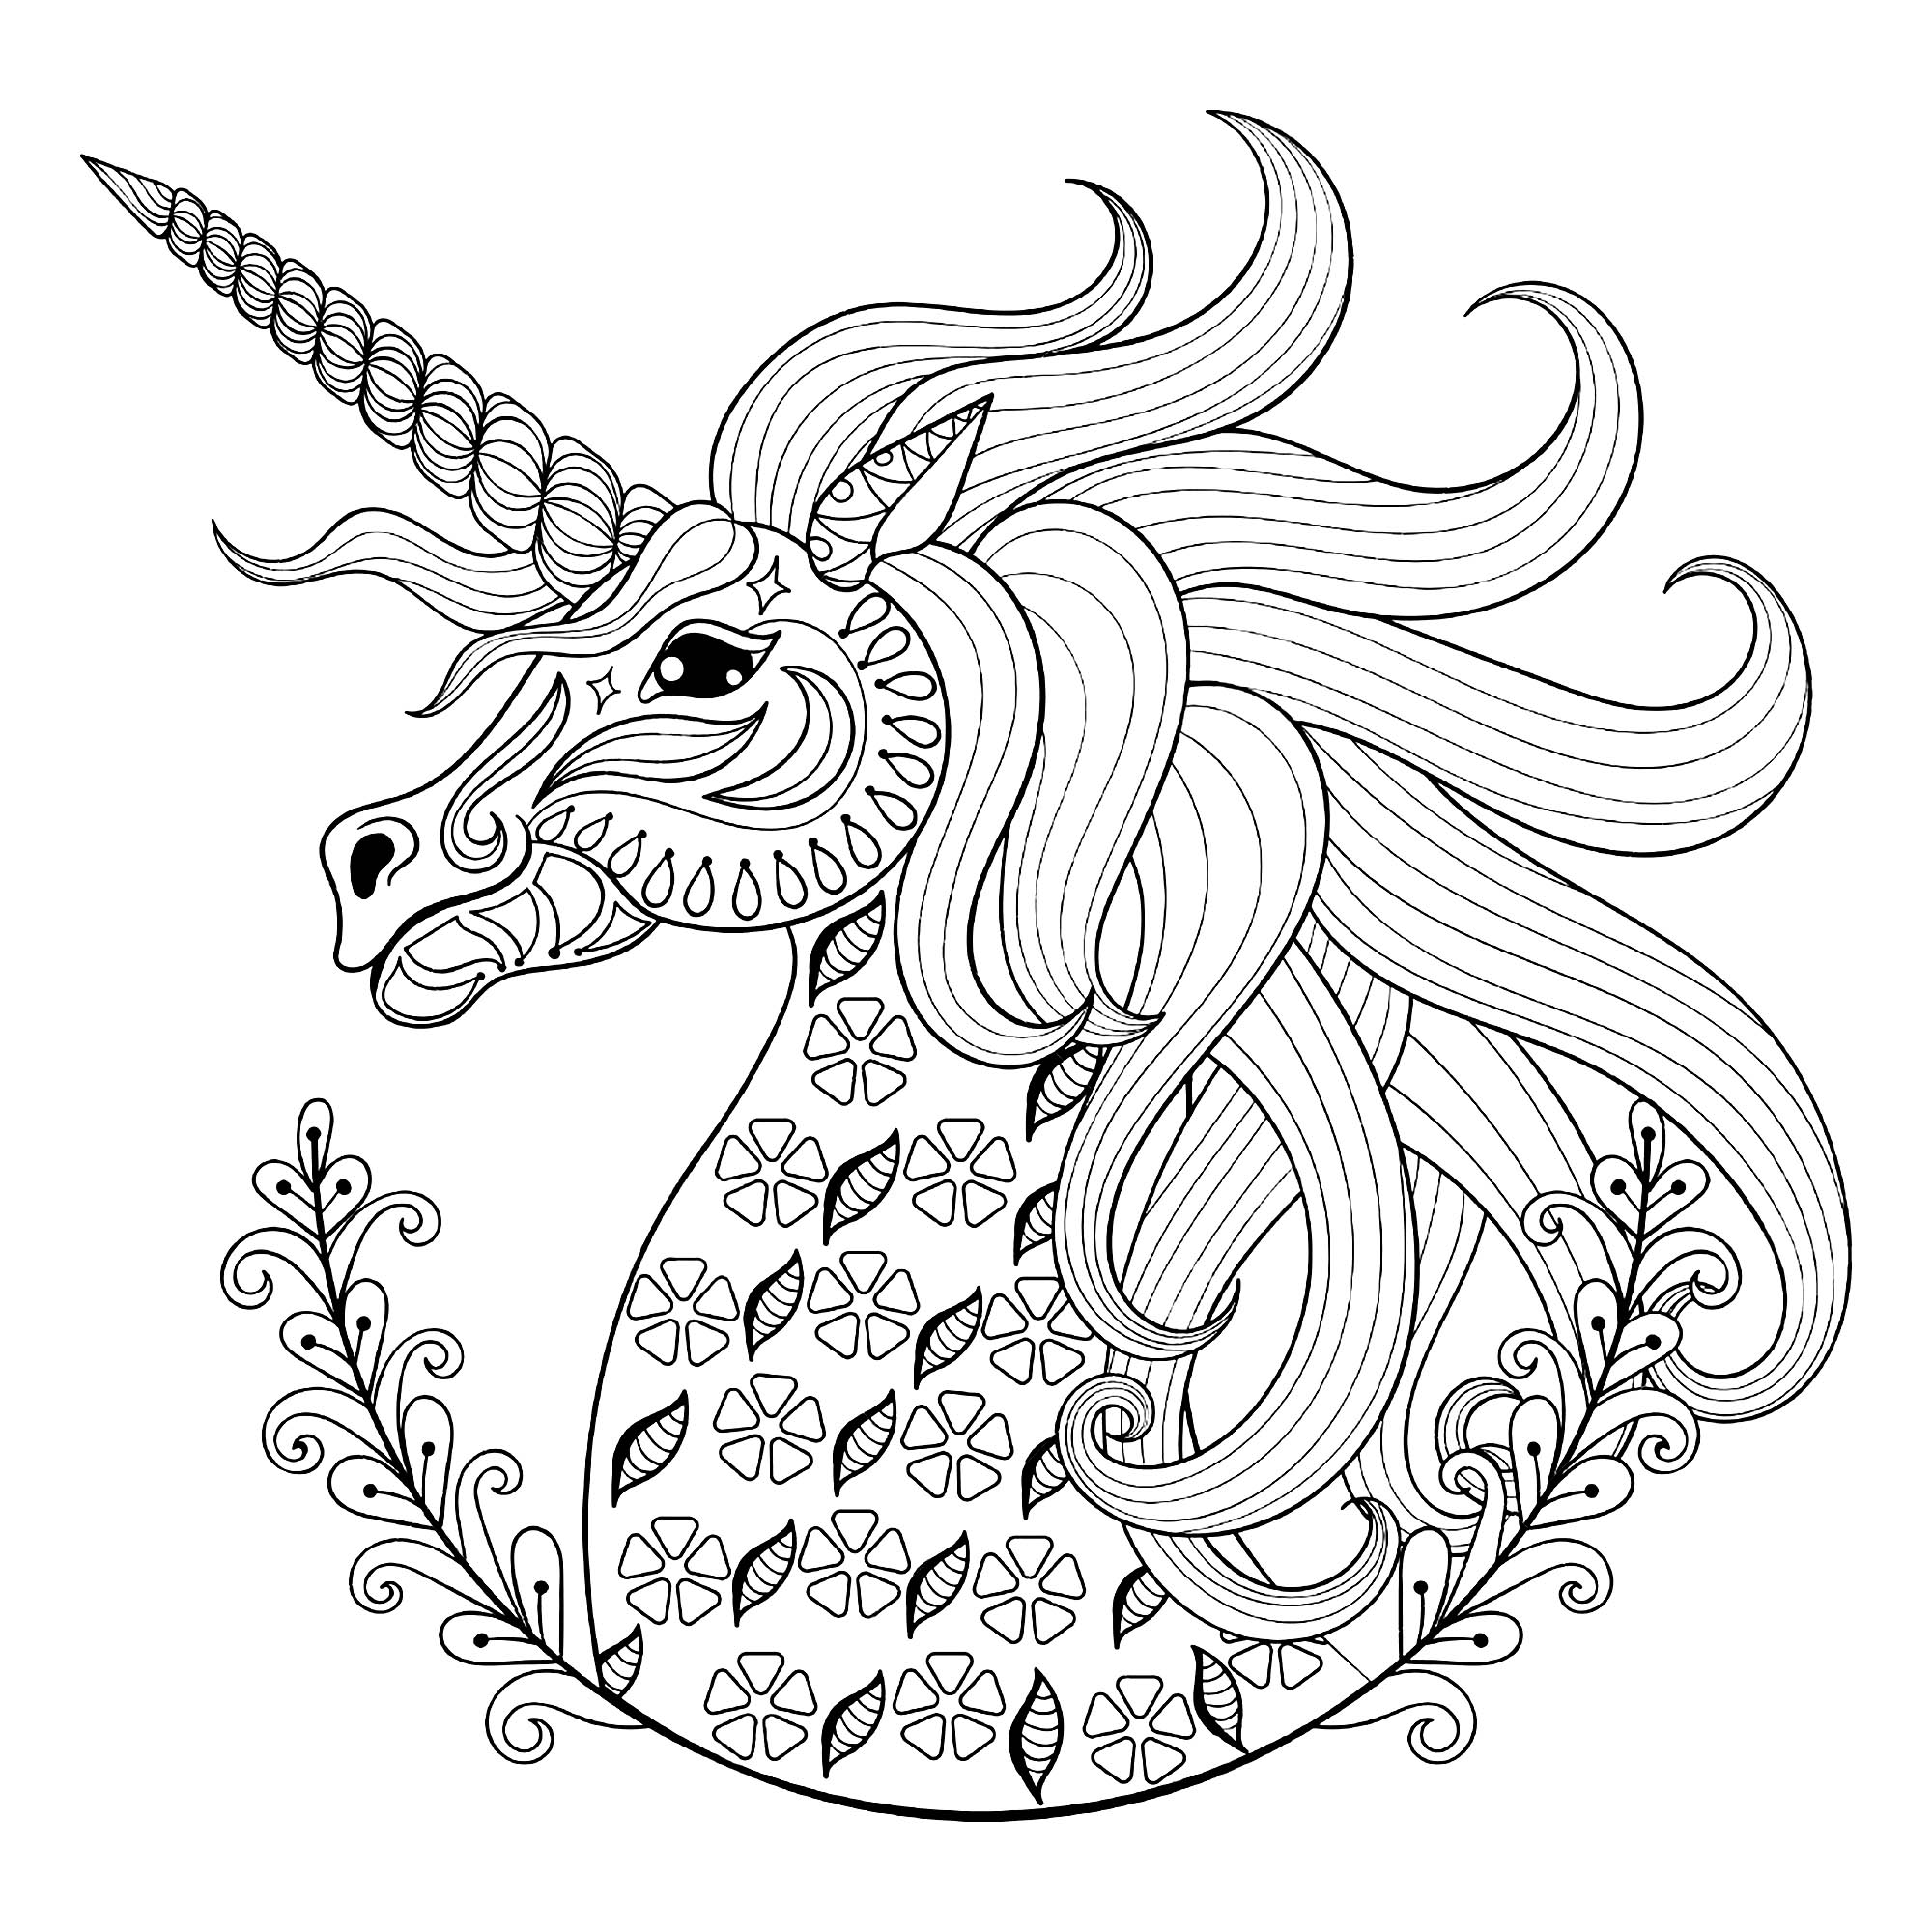 Unicorn Head Coloring Pages at GetColorings.com | Free printable ...